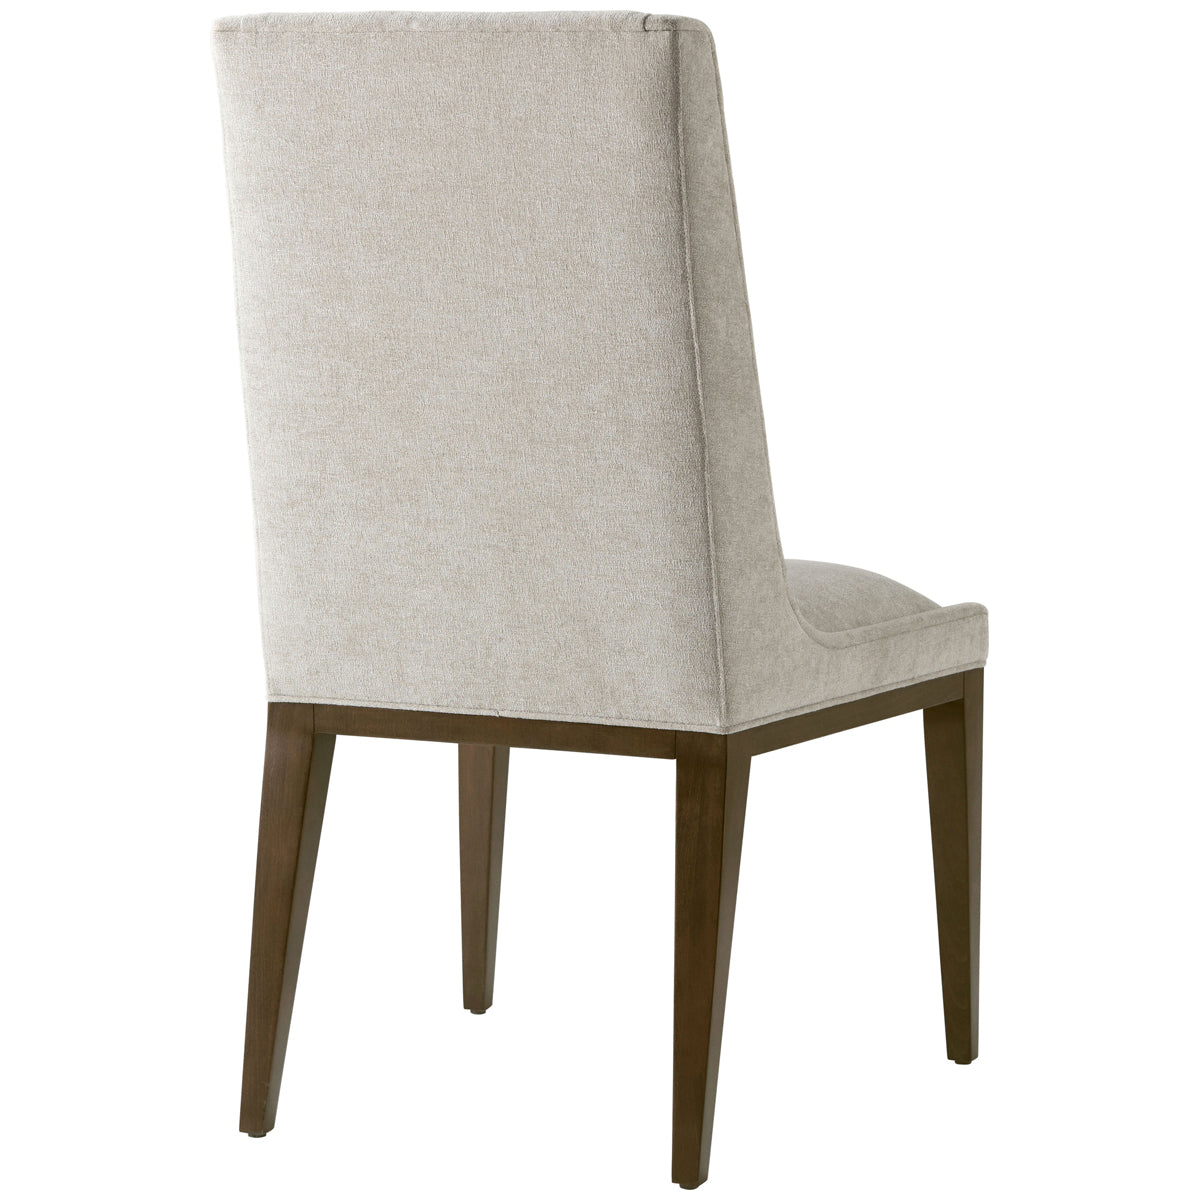 Theodore Alexander Lido Upholstered Dining Side Chair, Set of 2